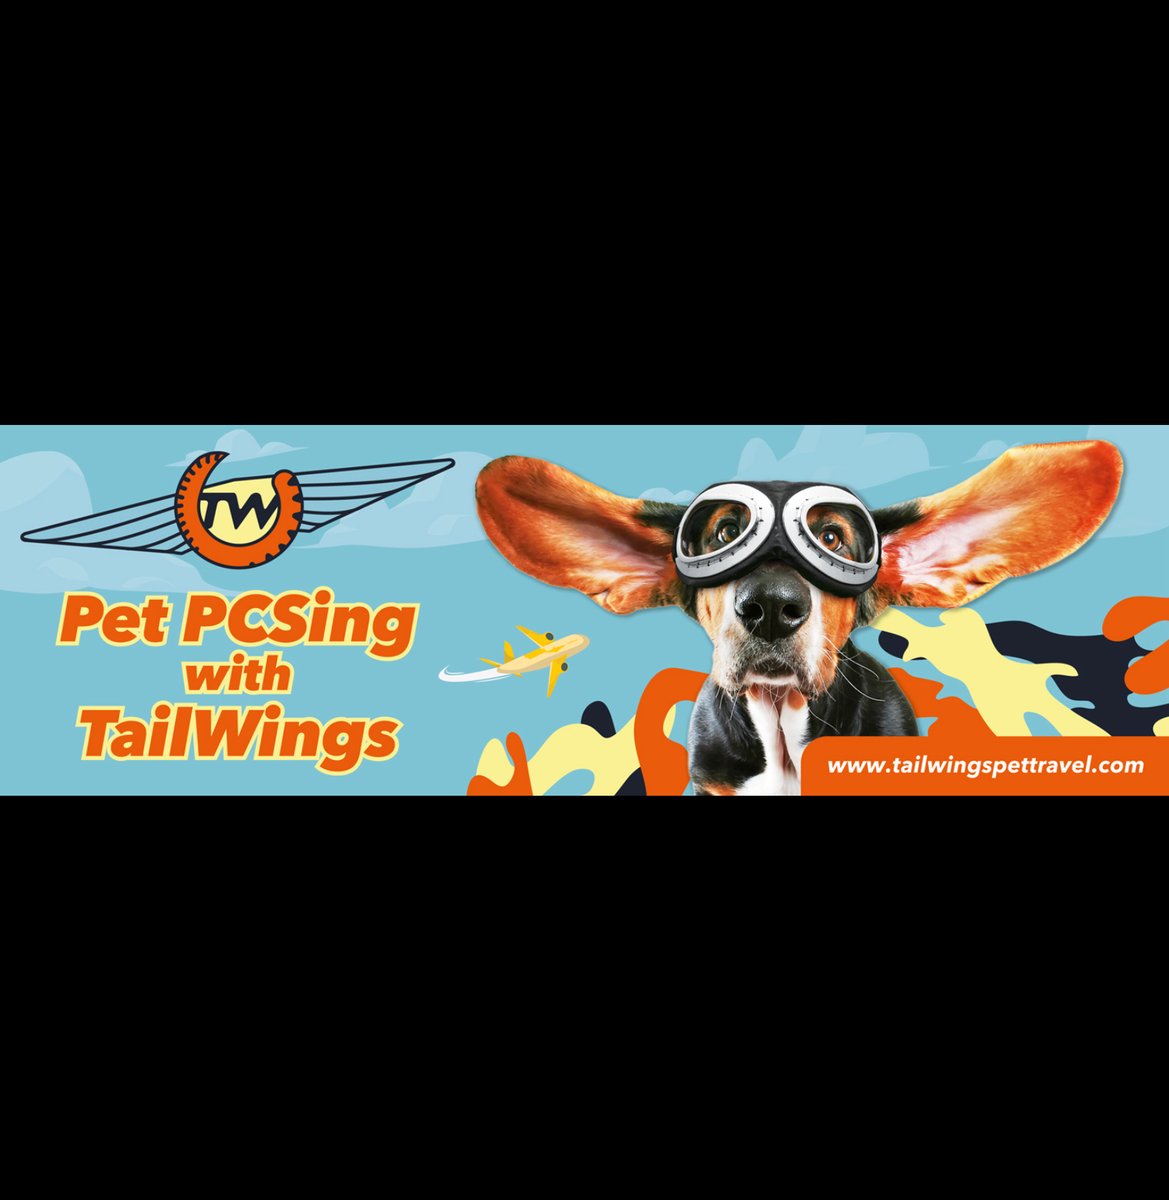 Looking to move a pet CONUS or OCONUS? Check out TailWings!

#military #purina #pcswithpets #pcs #pcsmove #moving